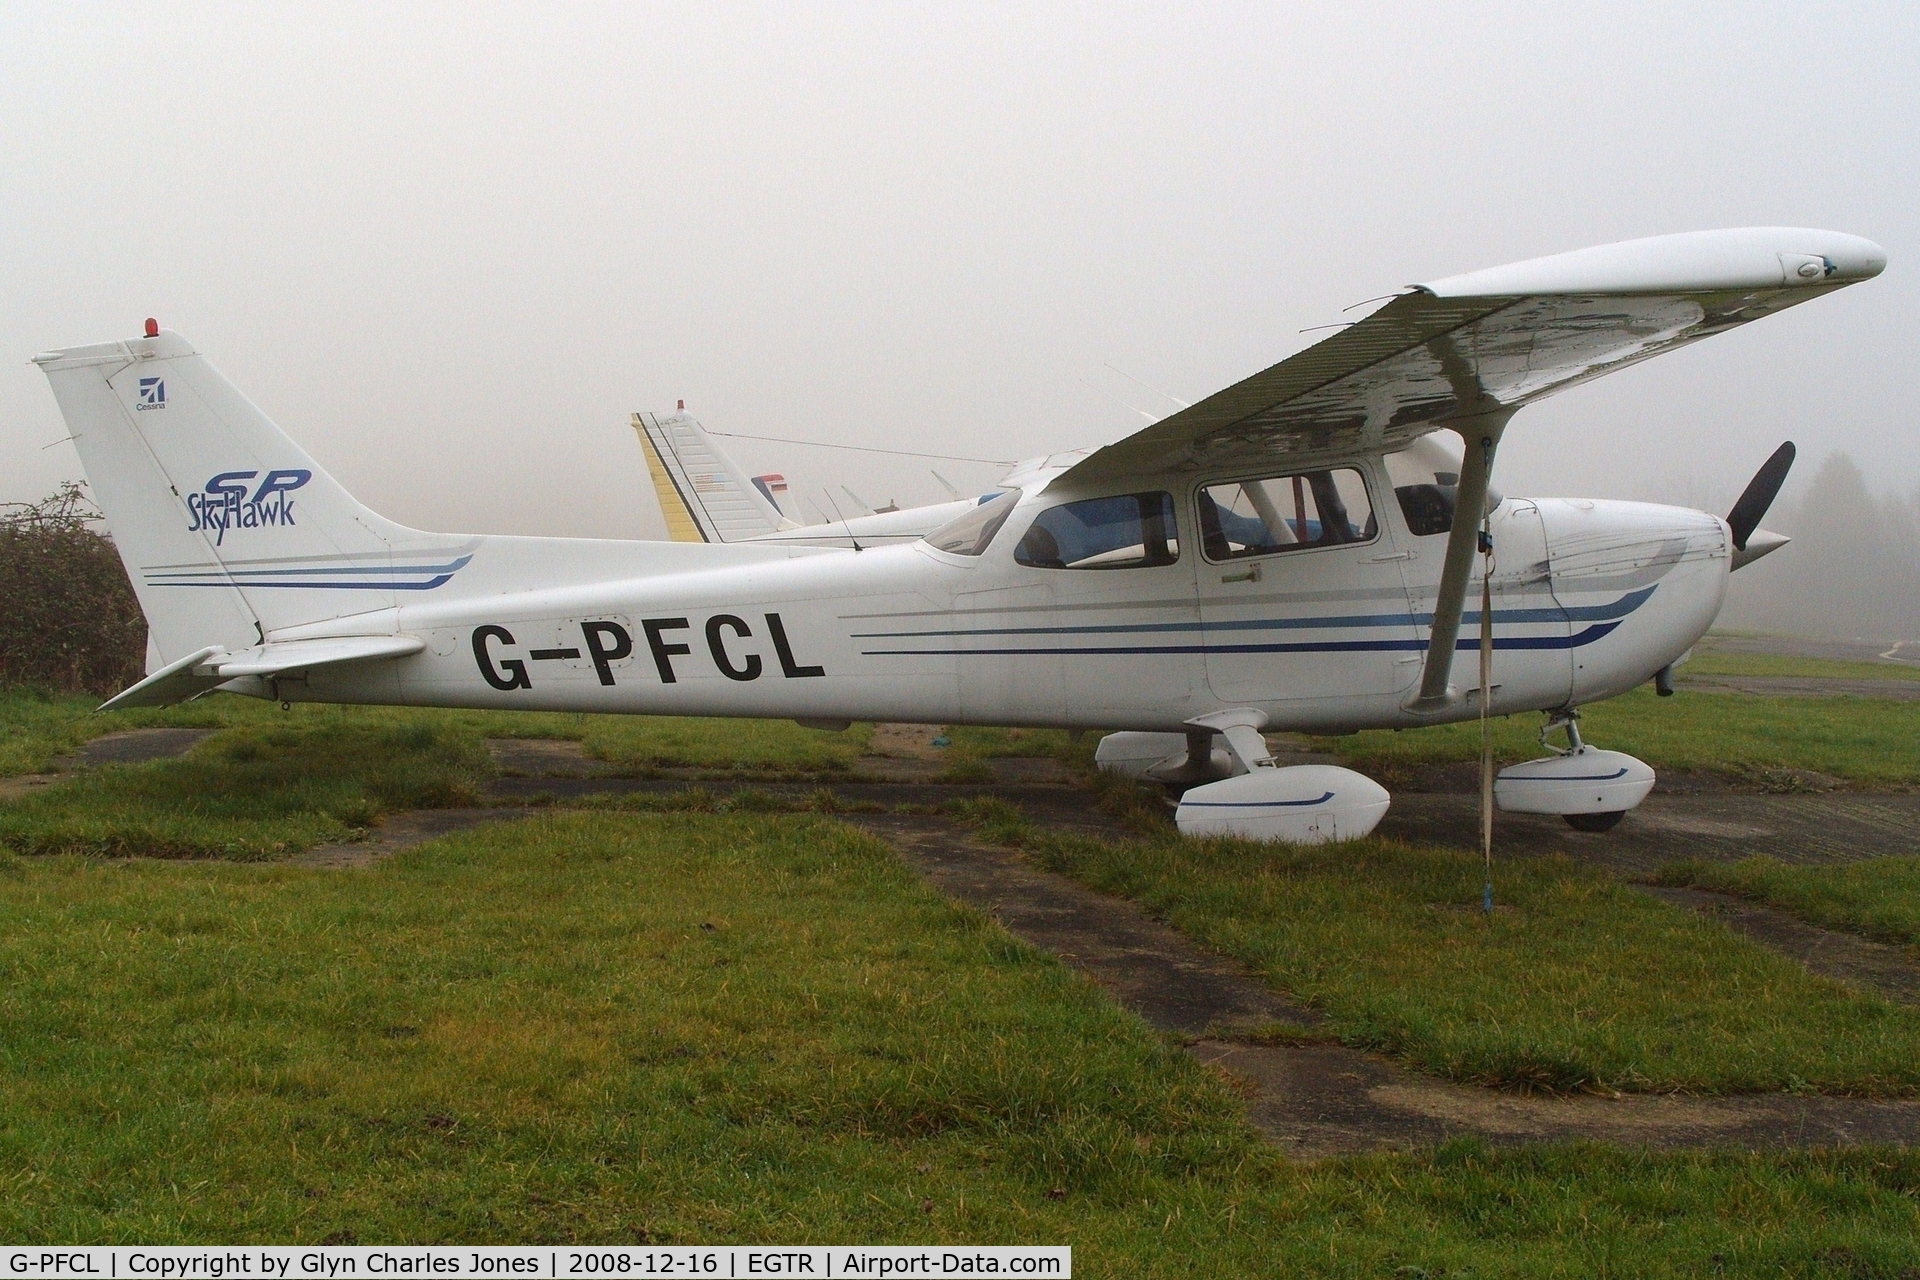 G-PFCL, 2003 Cessna 172S Skyhawk SP C/N 172S9330, Taken on a quiet cold and foggy day. With thanks to Elstree control tower who granted me authority to take photographs on the aerodrome. Previously N53287. Owned by Critical Simulations Ltd.